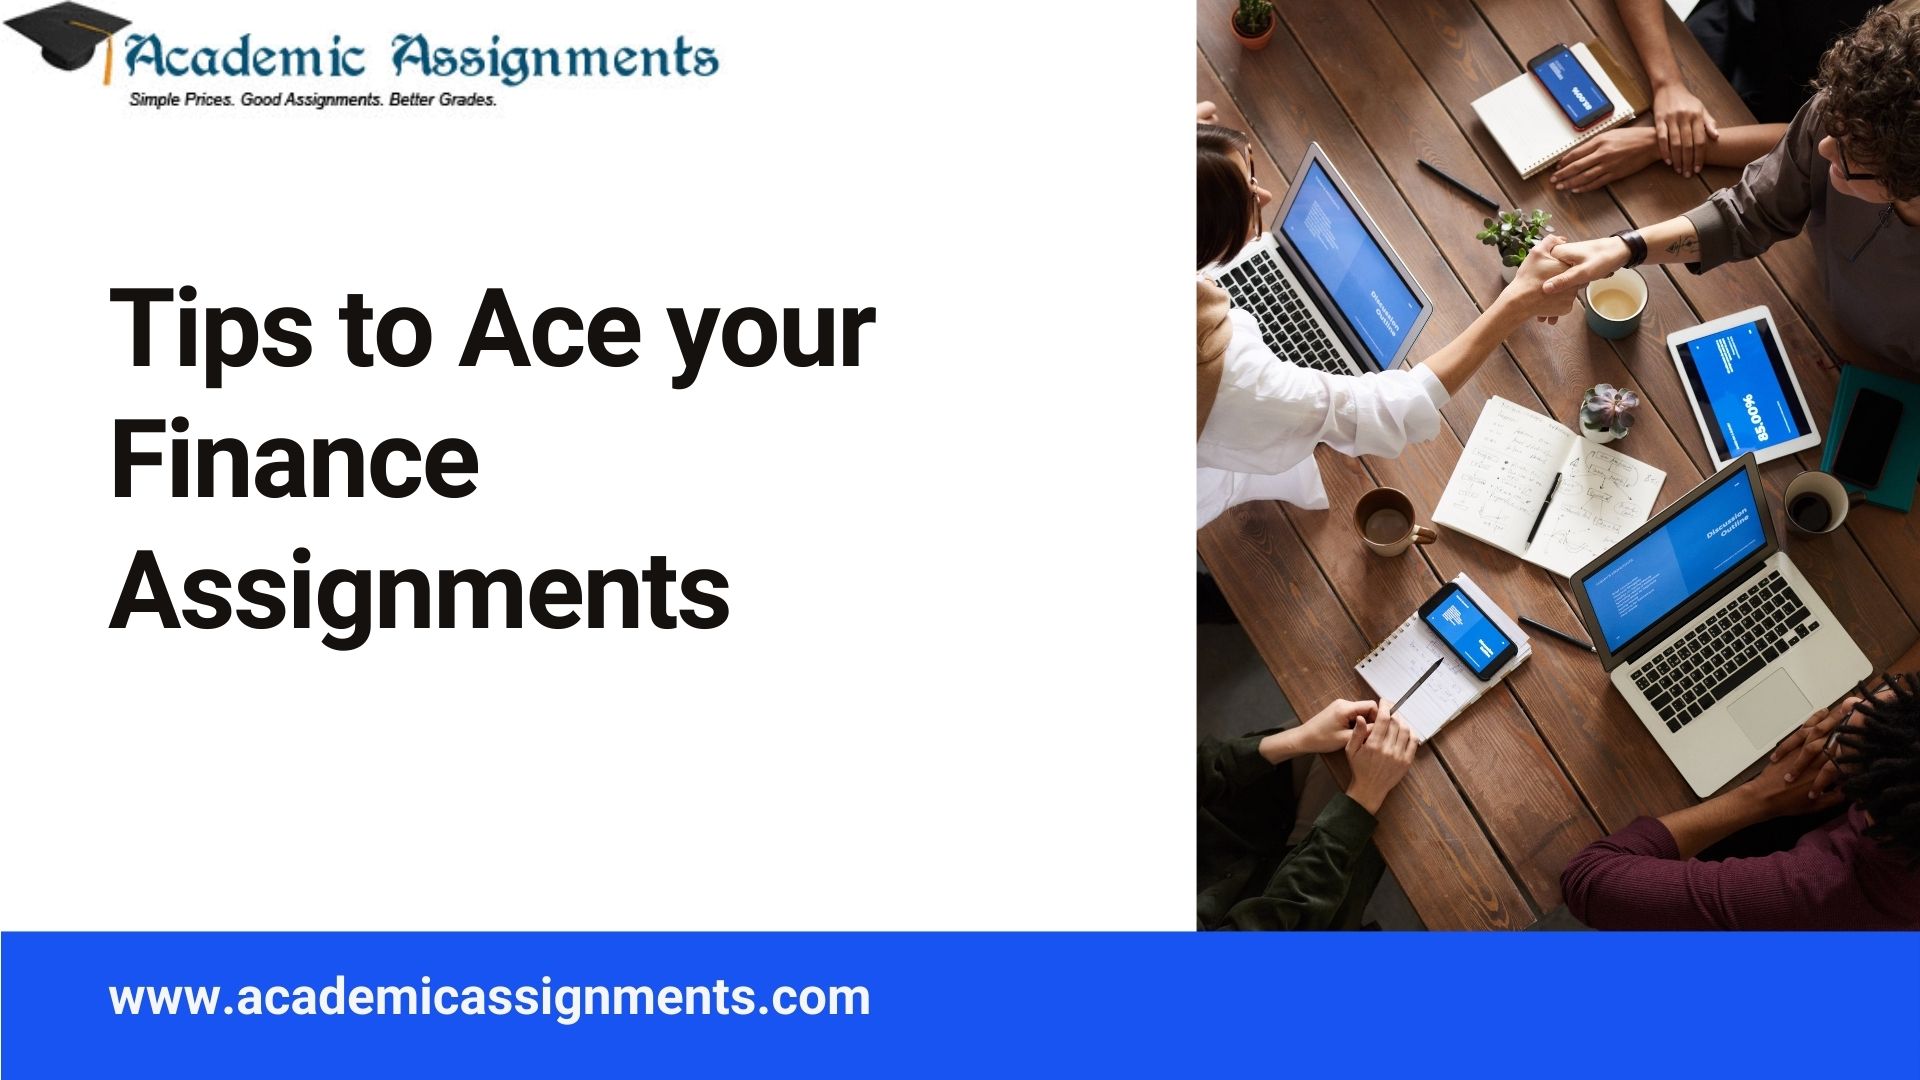 Tips to Ace your Finance Assignments